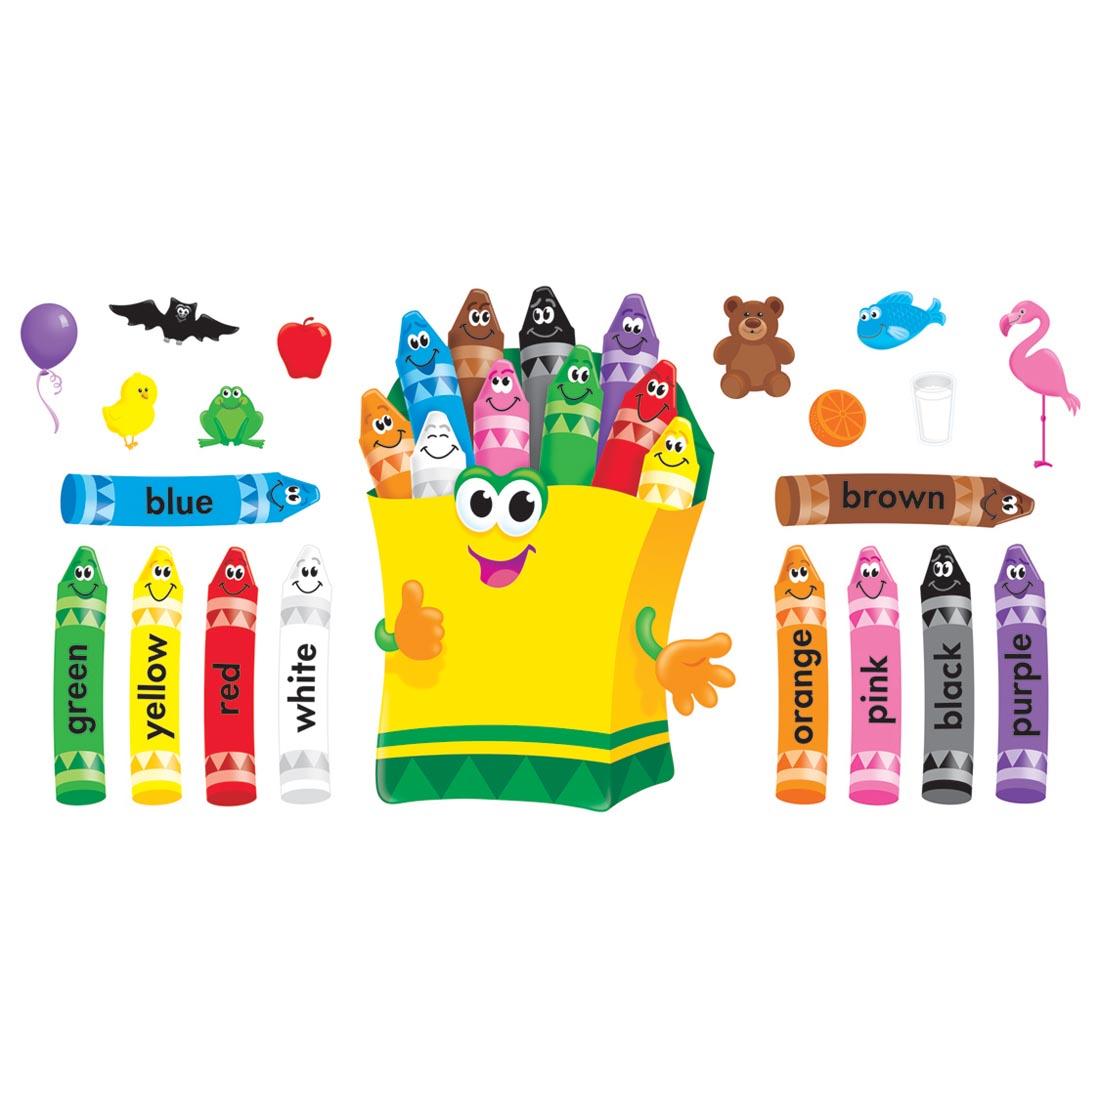 TREND Colorful Crayons Bulletin Board Set